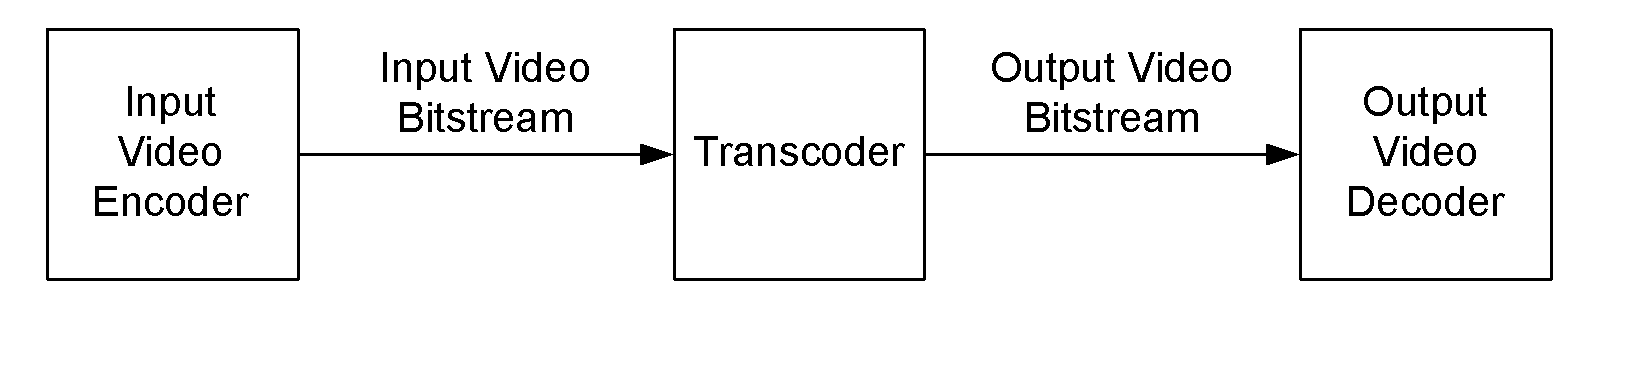 System And Method For Transcoding Between Scalable And Non-Scalable Video Codecs